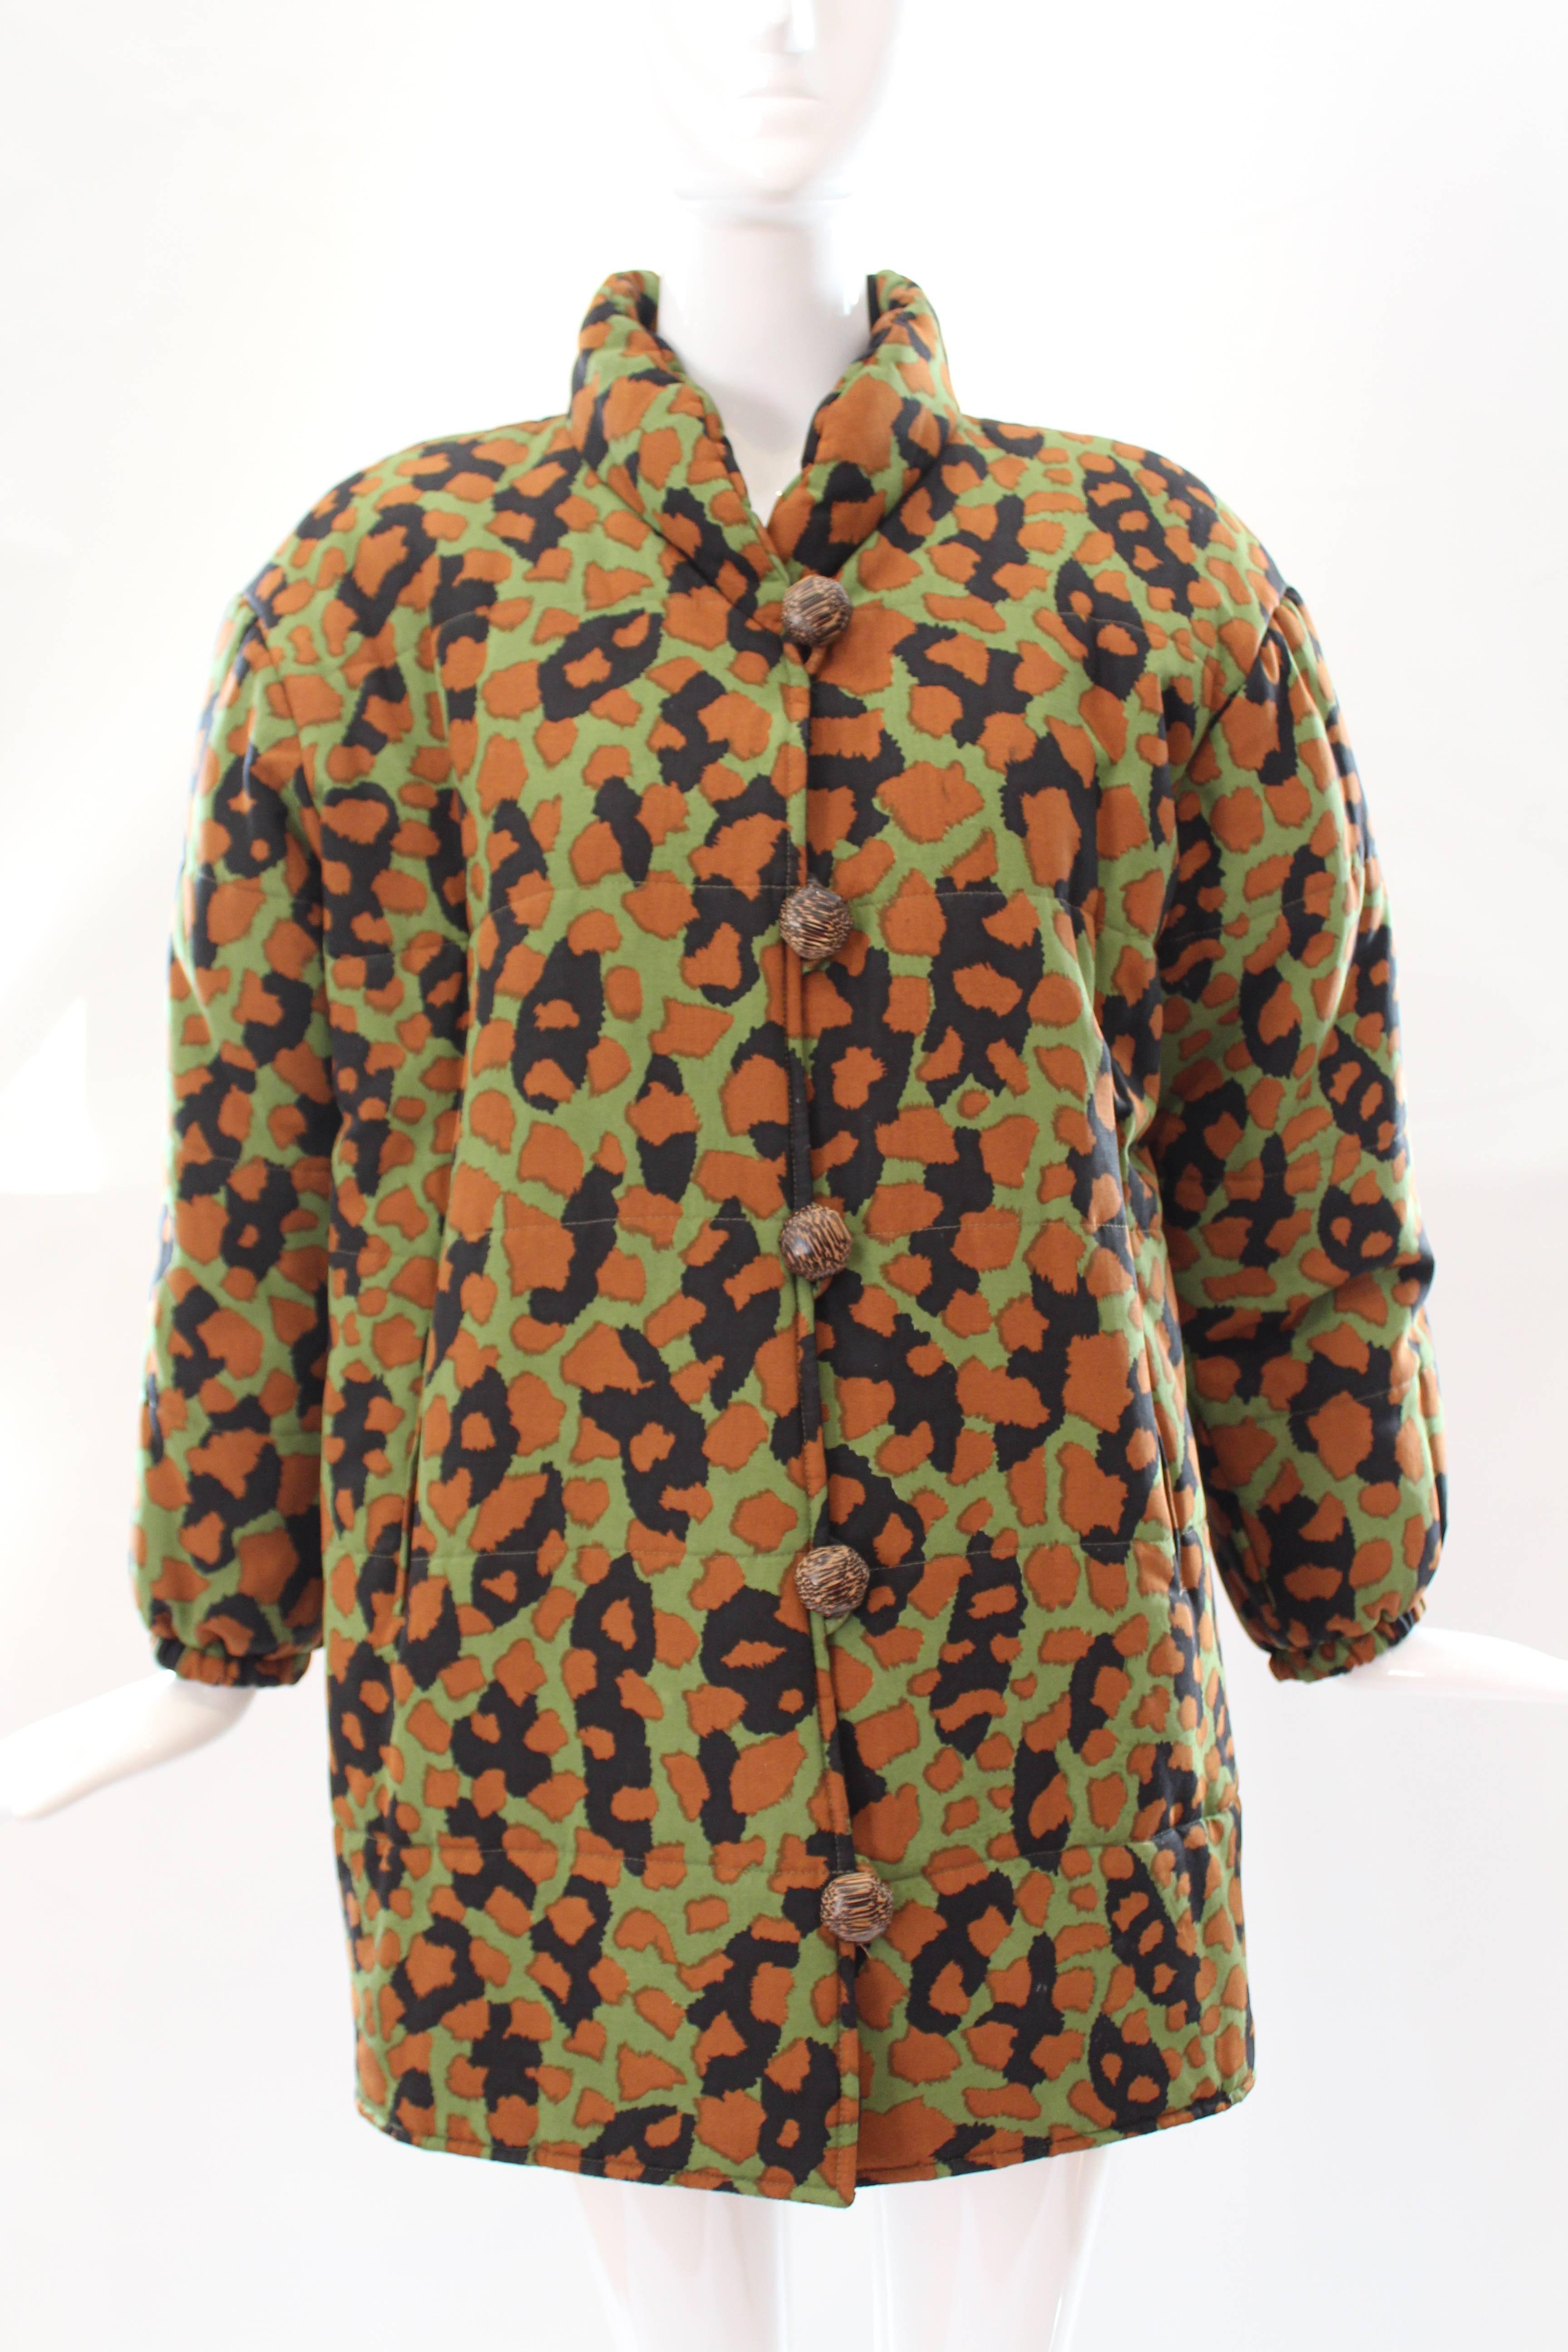 This YSL puffer coat combines modern style with a timeless shape. Stay warm in style in this camouflage puffer coat! 

Fits straight up and down. Puff sleeves. Elastic hem at the bottom of the sleeves. Camouflage print. Stand up collar. 5 wooden